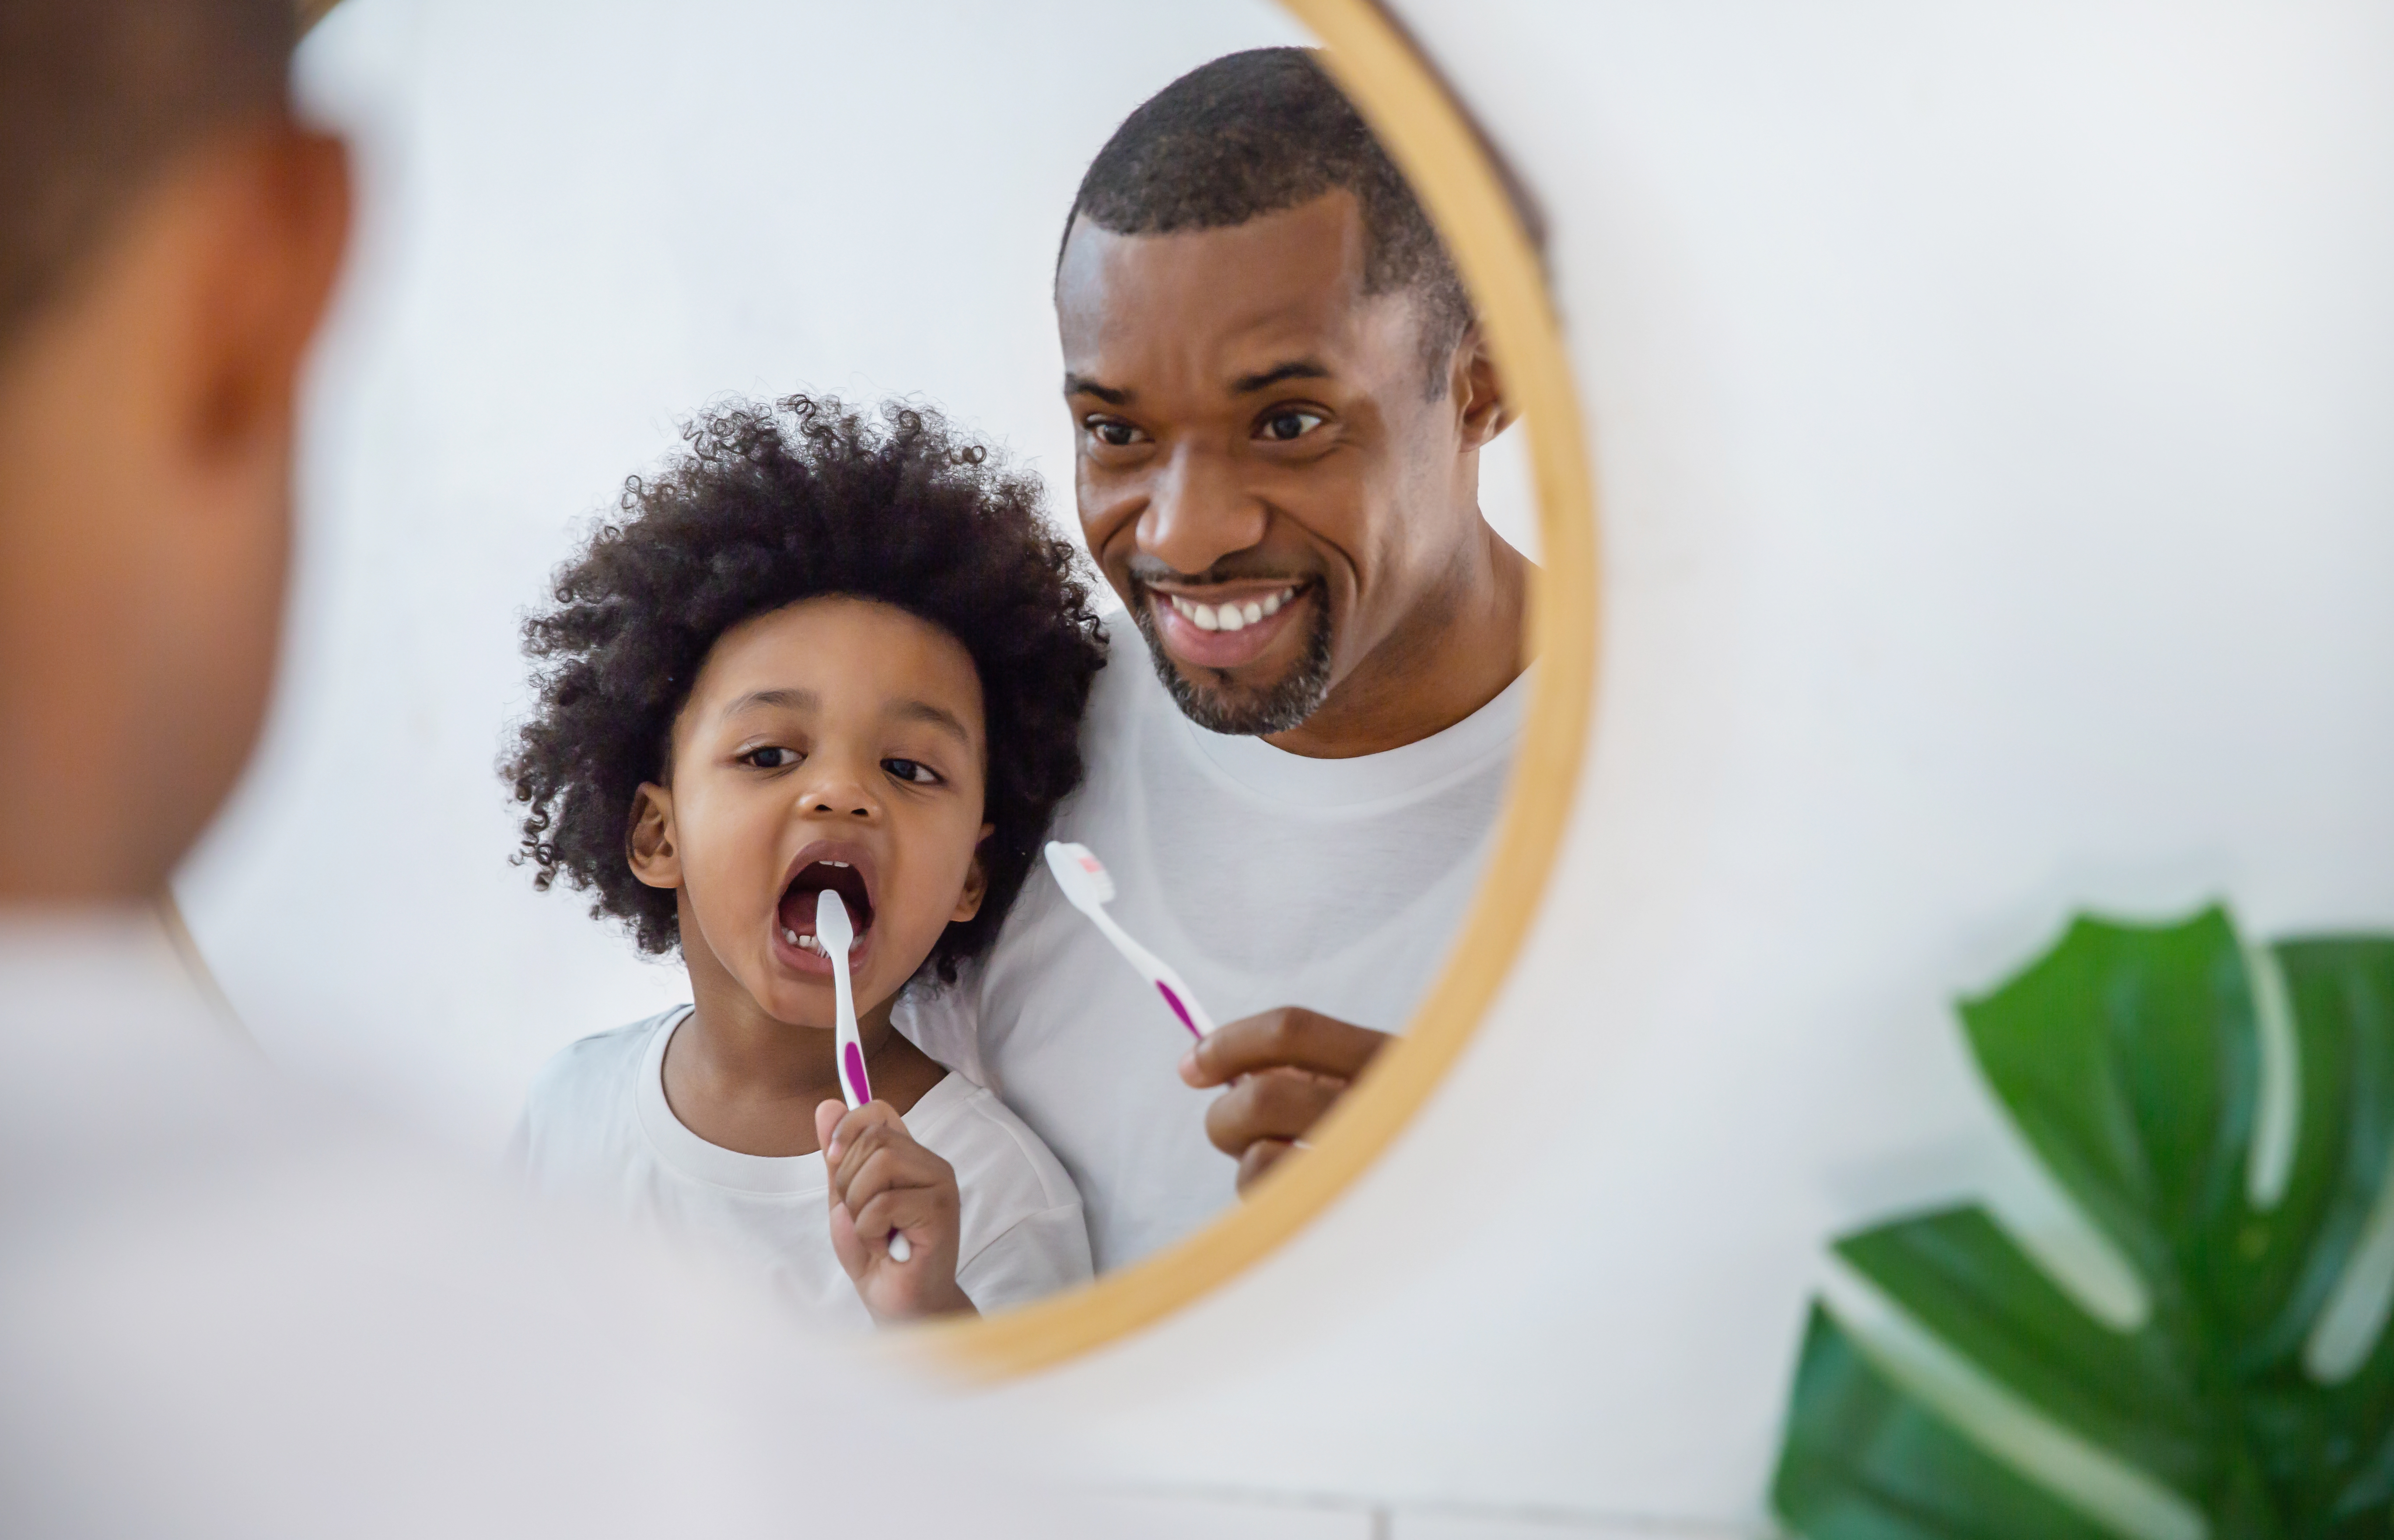 Tips On Oral Health From A Family Dentist